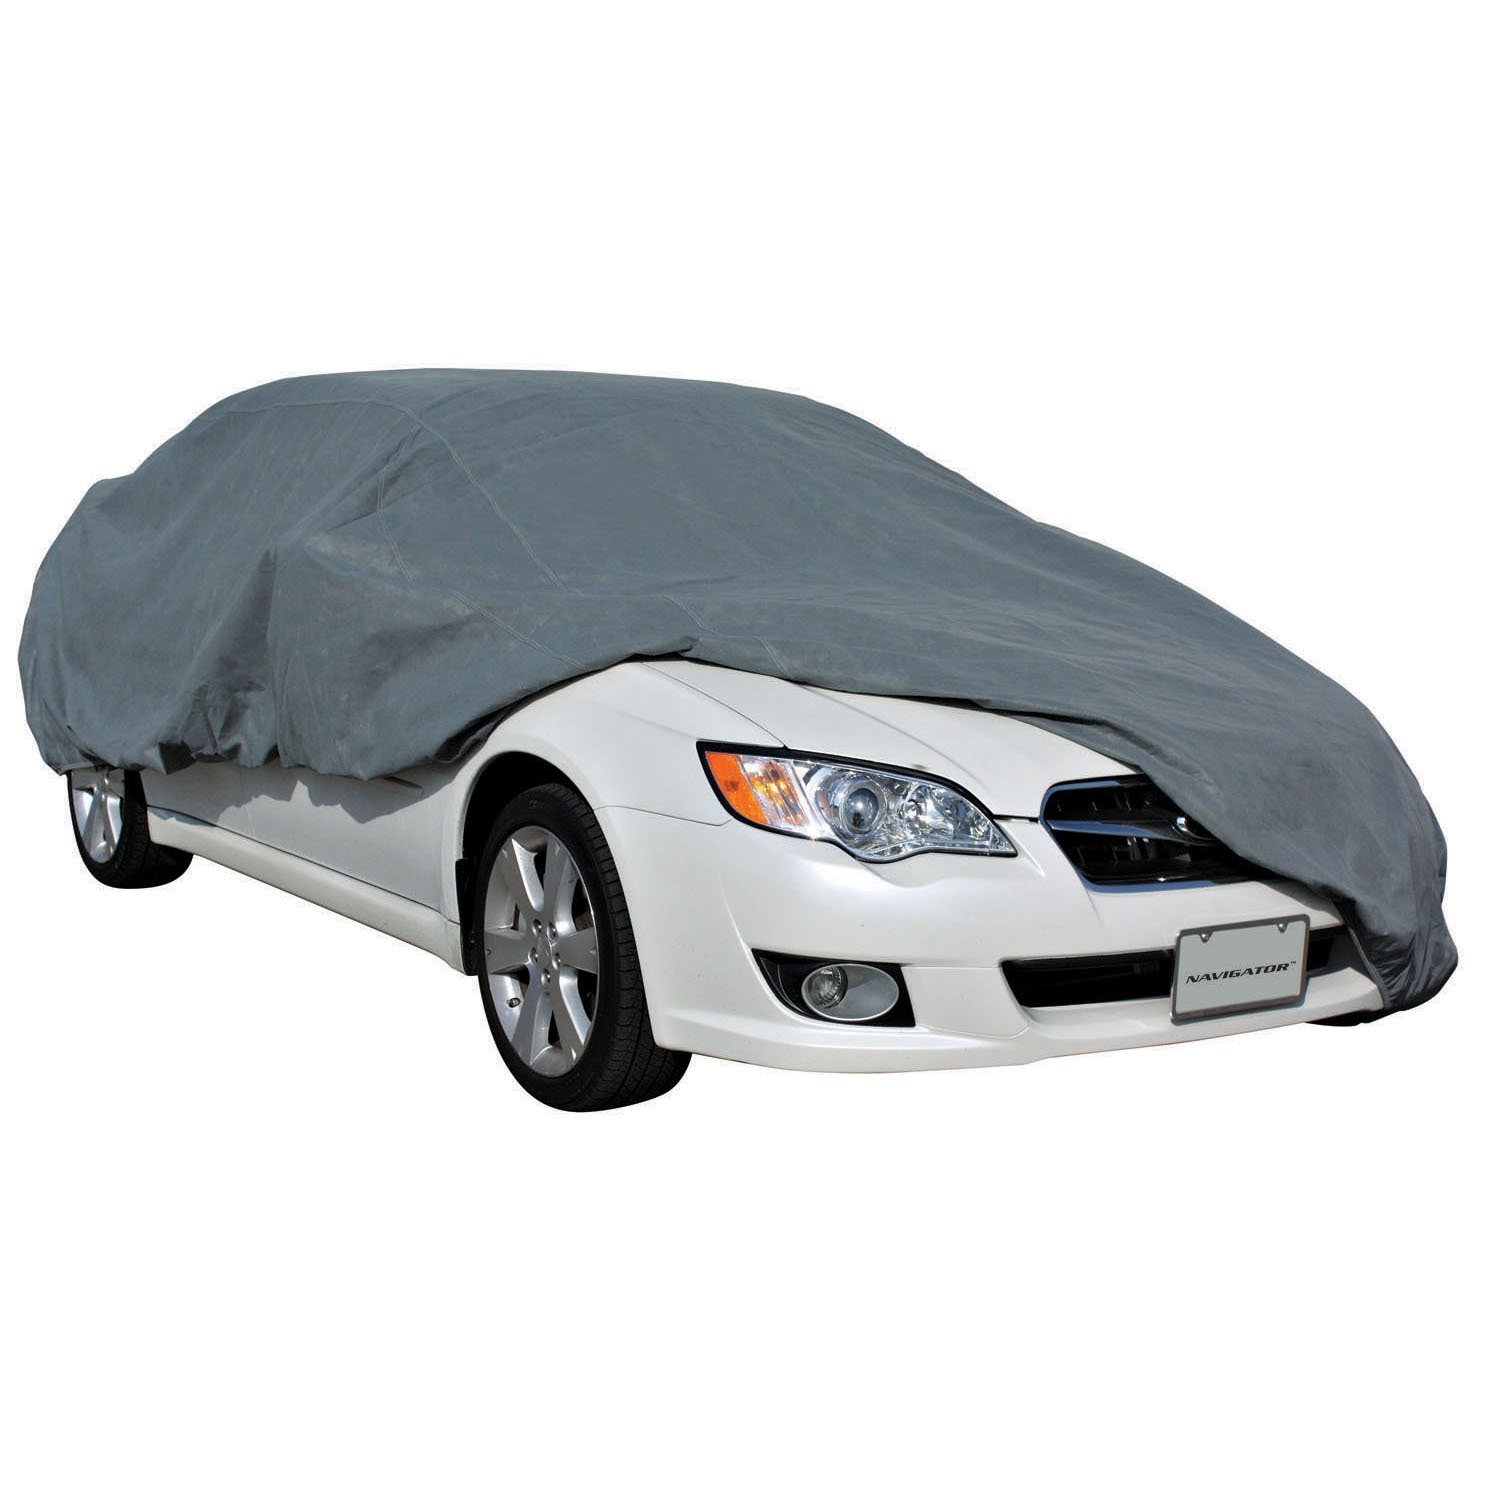 Auto Car Cover, Heavy Duty Auto-covers Outdoor Waterproof Car Covers